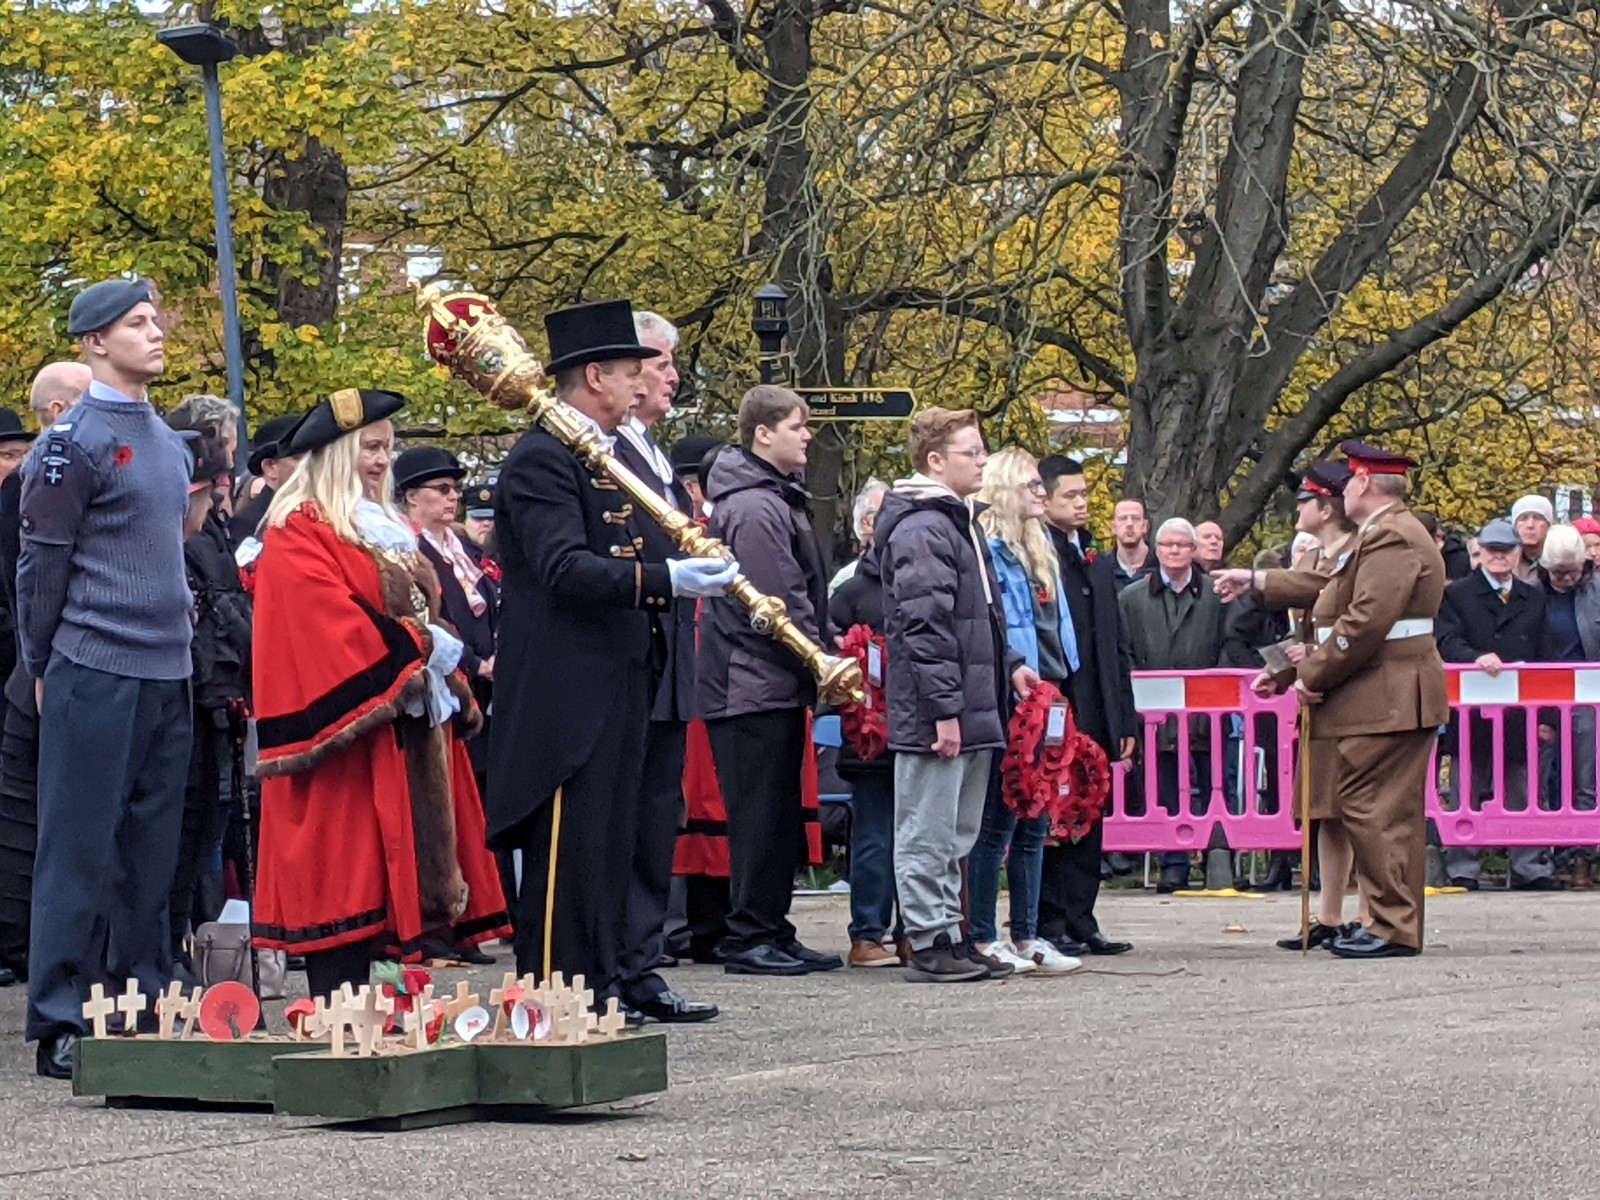 Members of Rotherham Youth Cabinet holding poppy wreaths alongside Mayor Jenny Andrews at the 2021 Rotherham remembers event